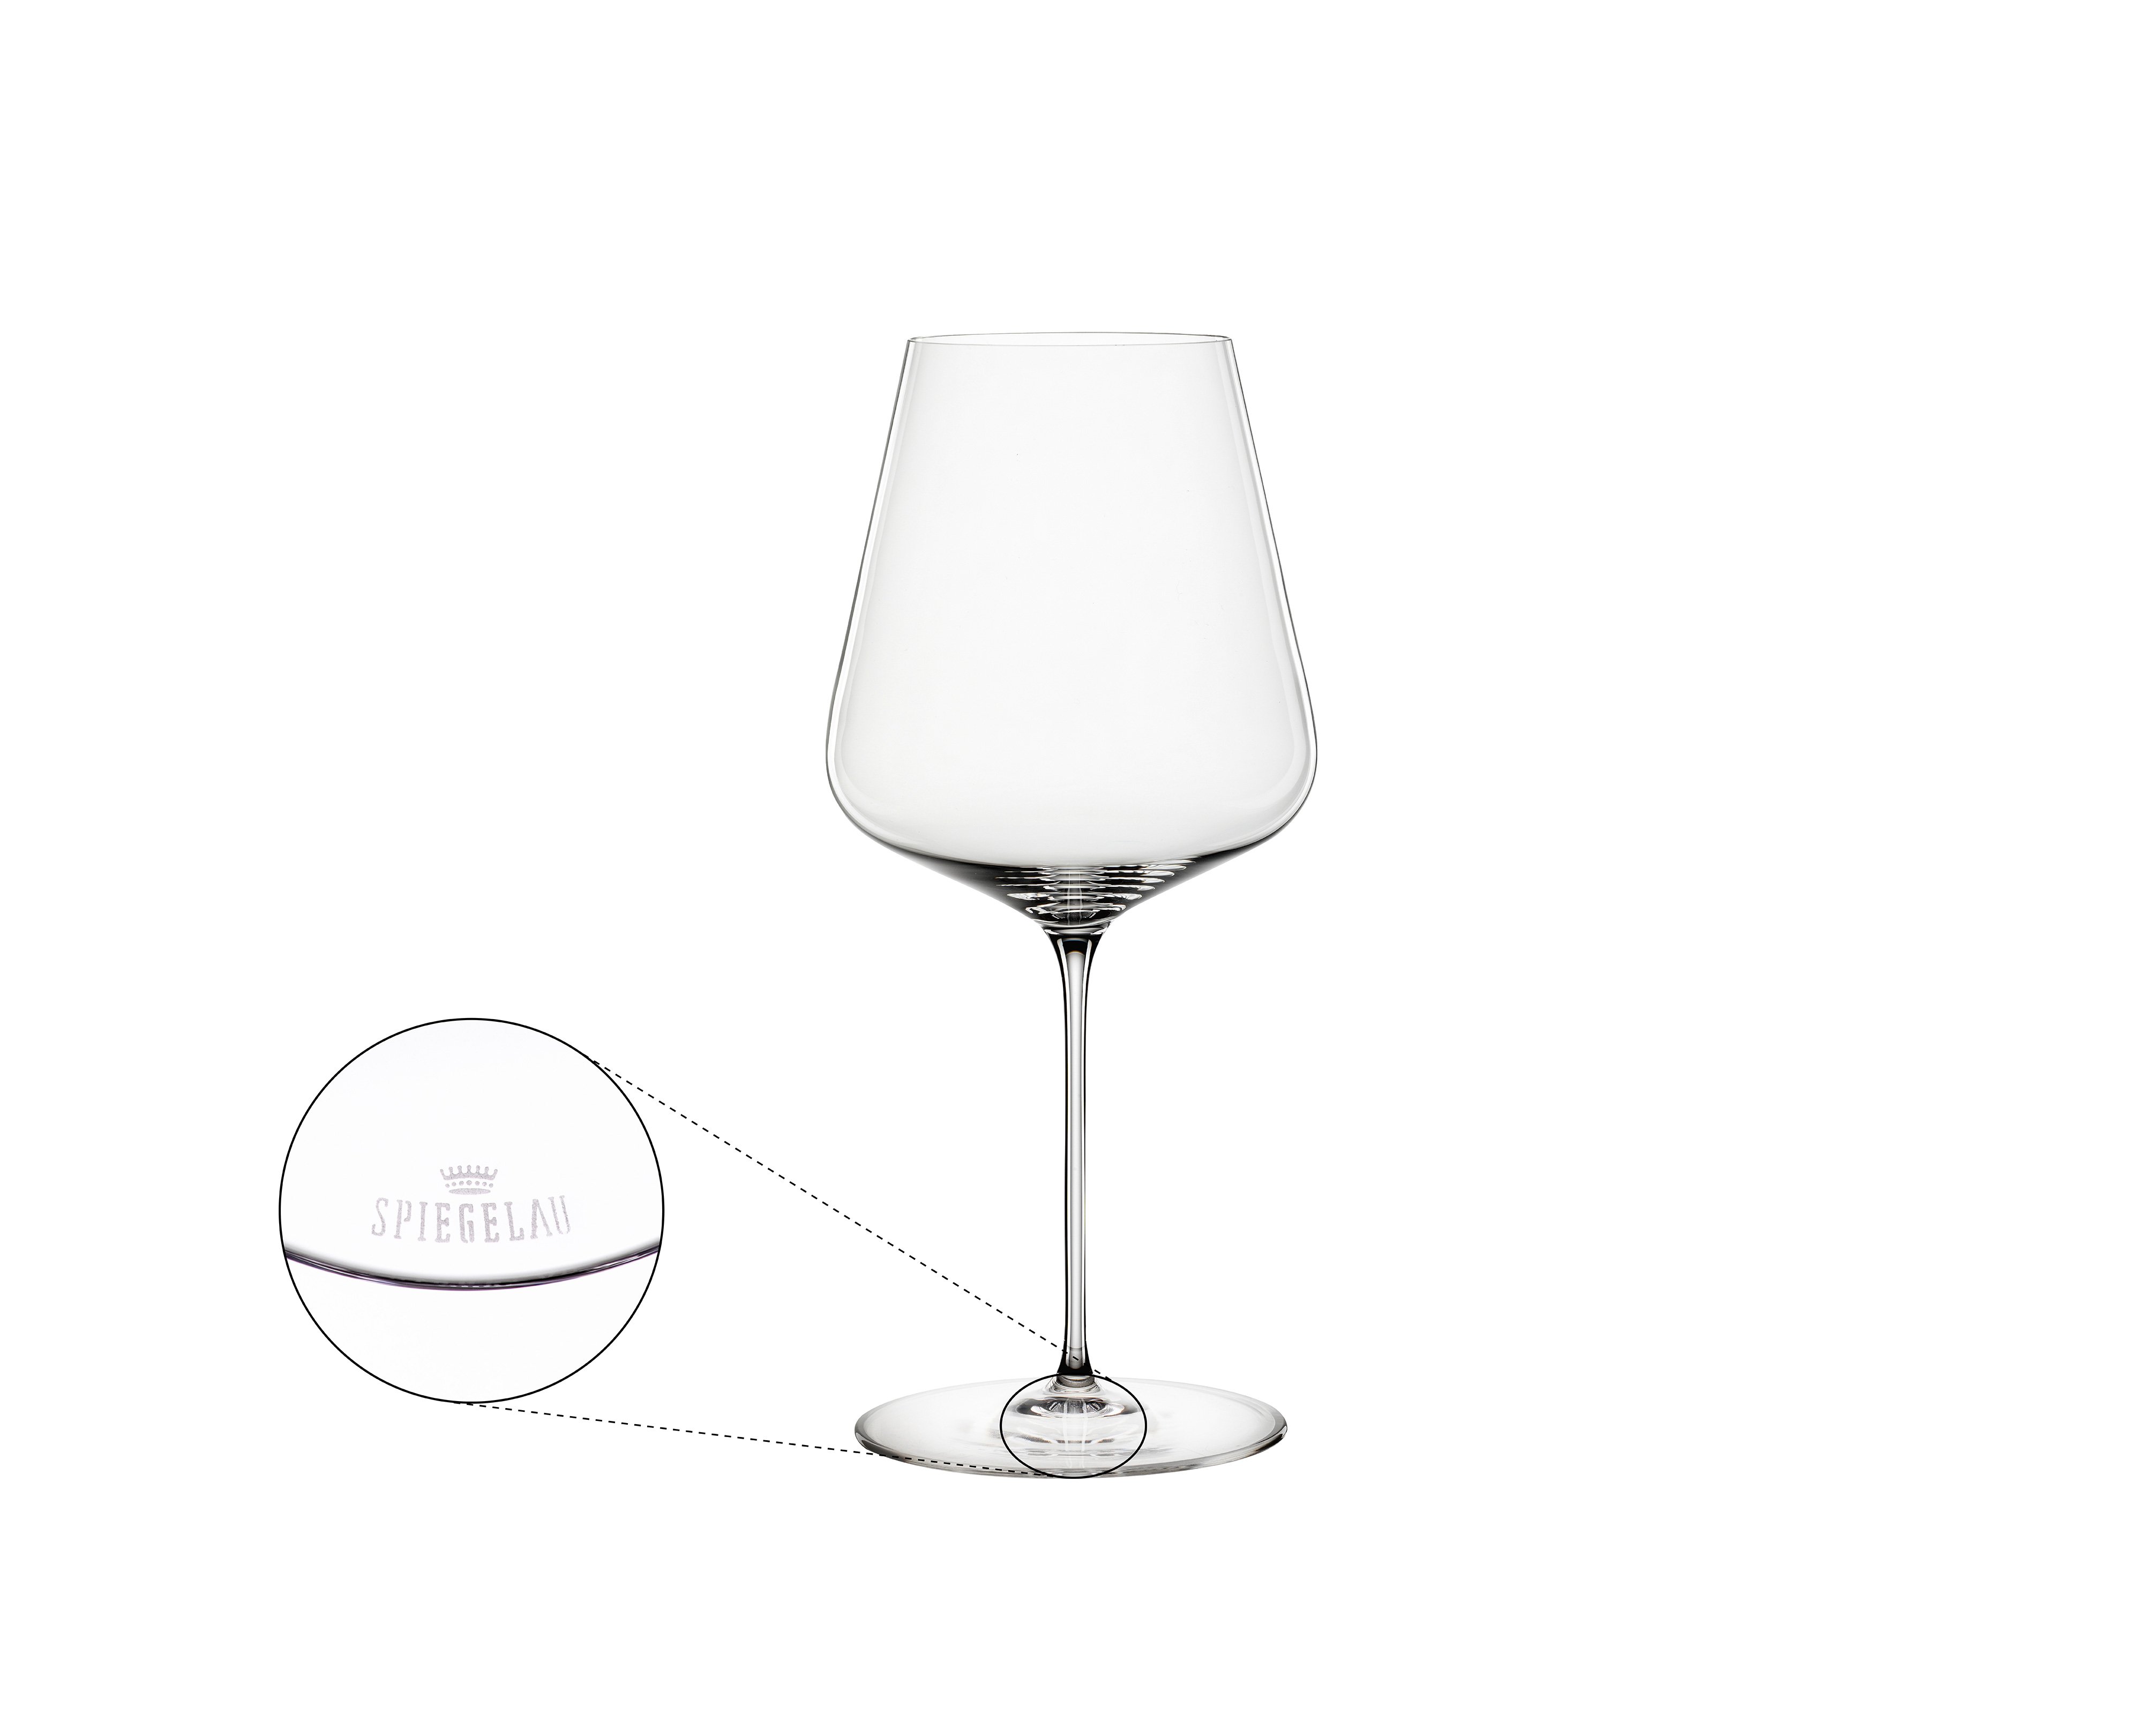 Bordeaux Wine Glass Dimensions & Drawings